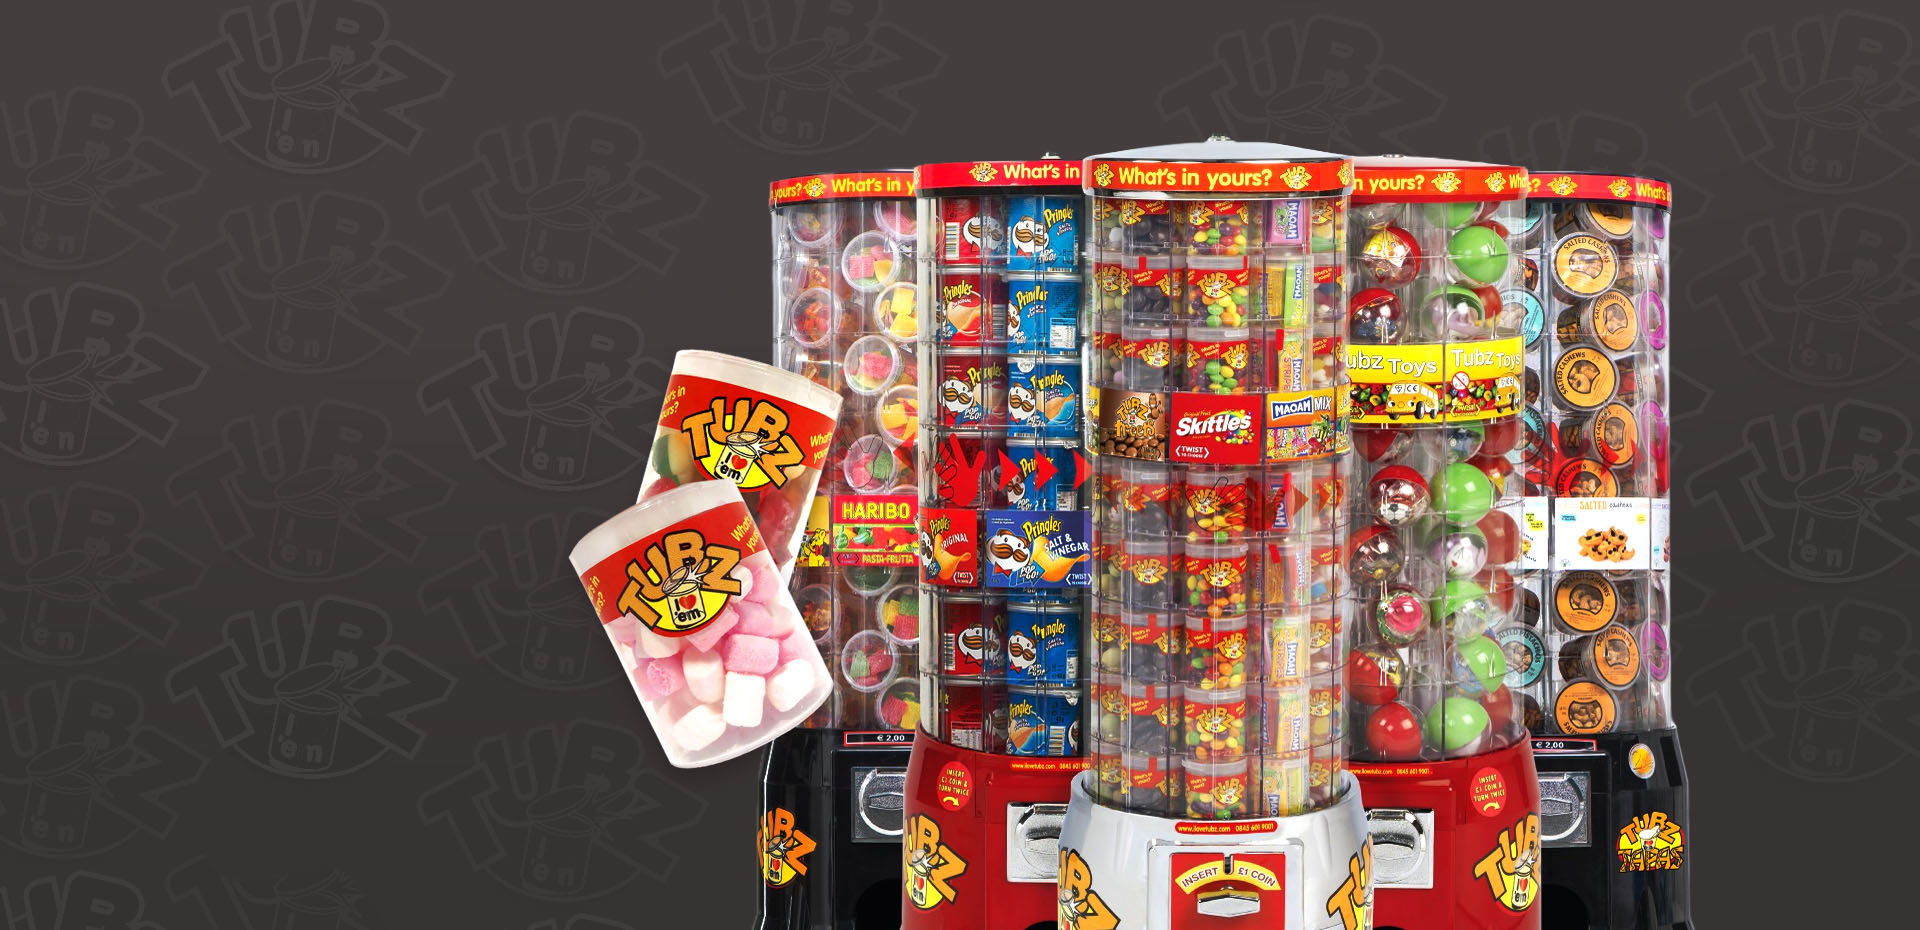 Installers Of Sweets Vending Machines For Soft Play Establishments Leicester